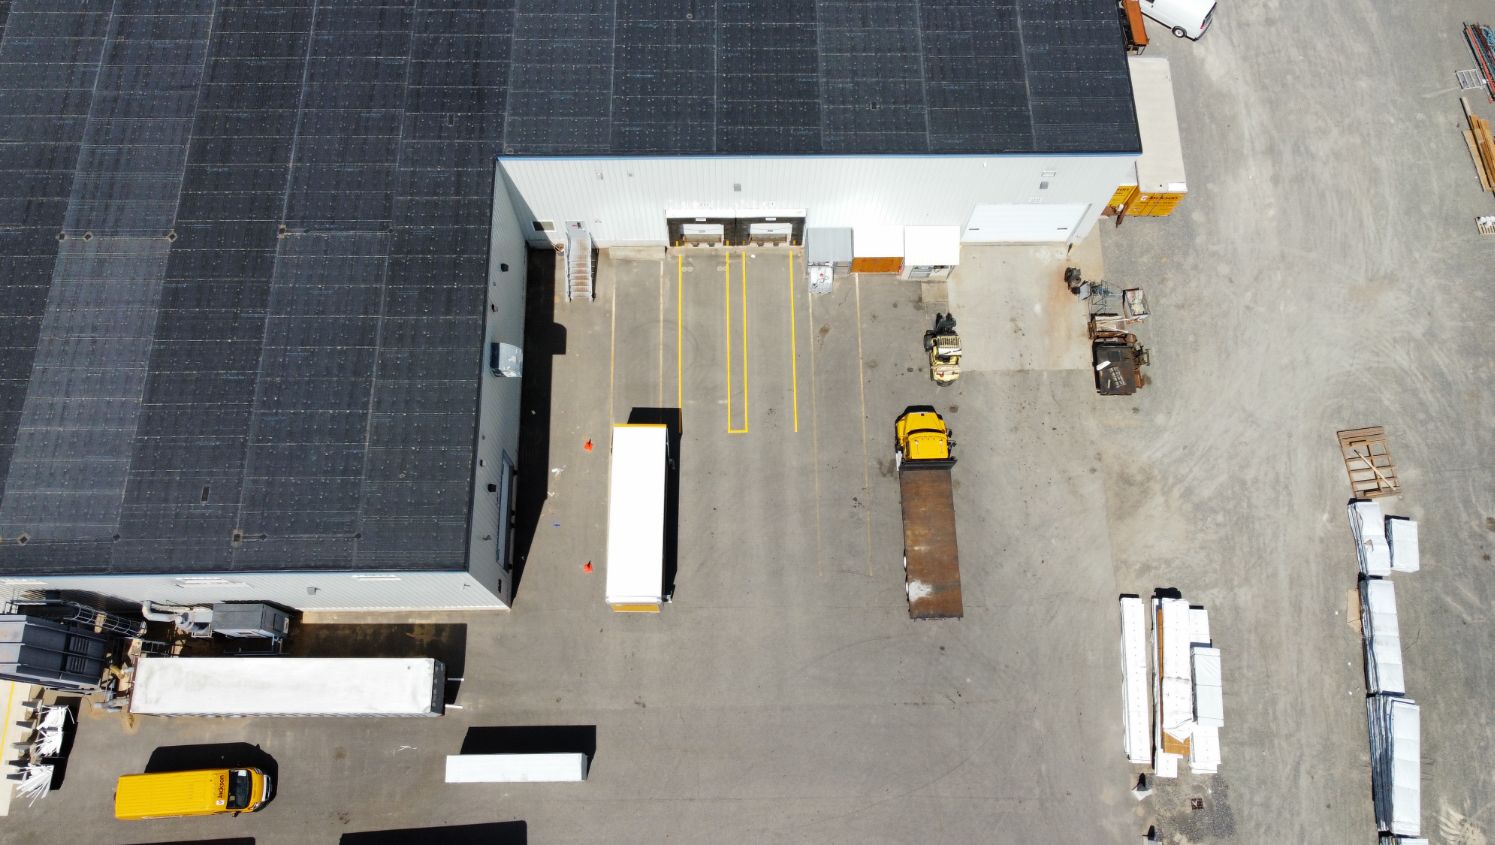 an aerial view of trucks in the loading zone